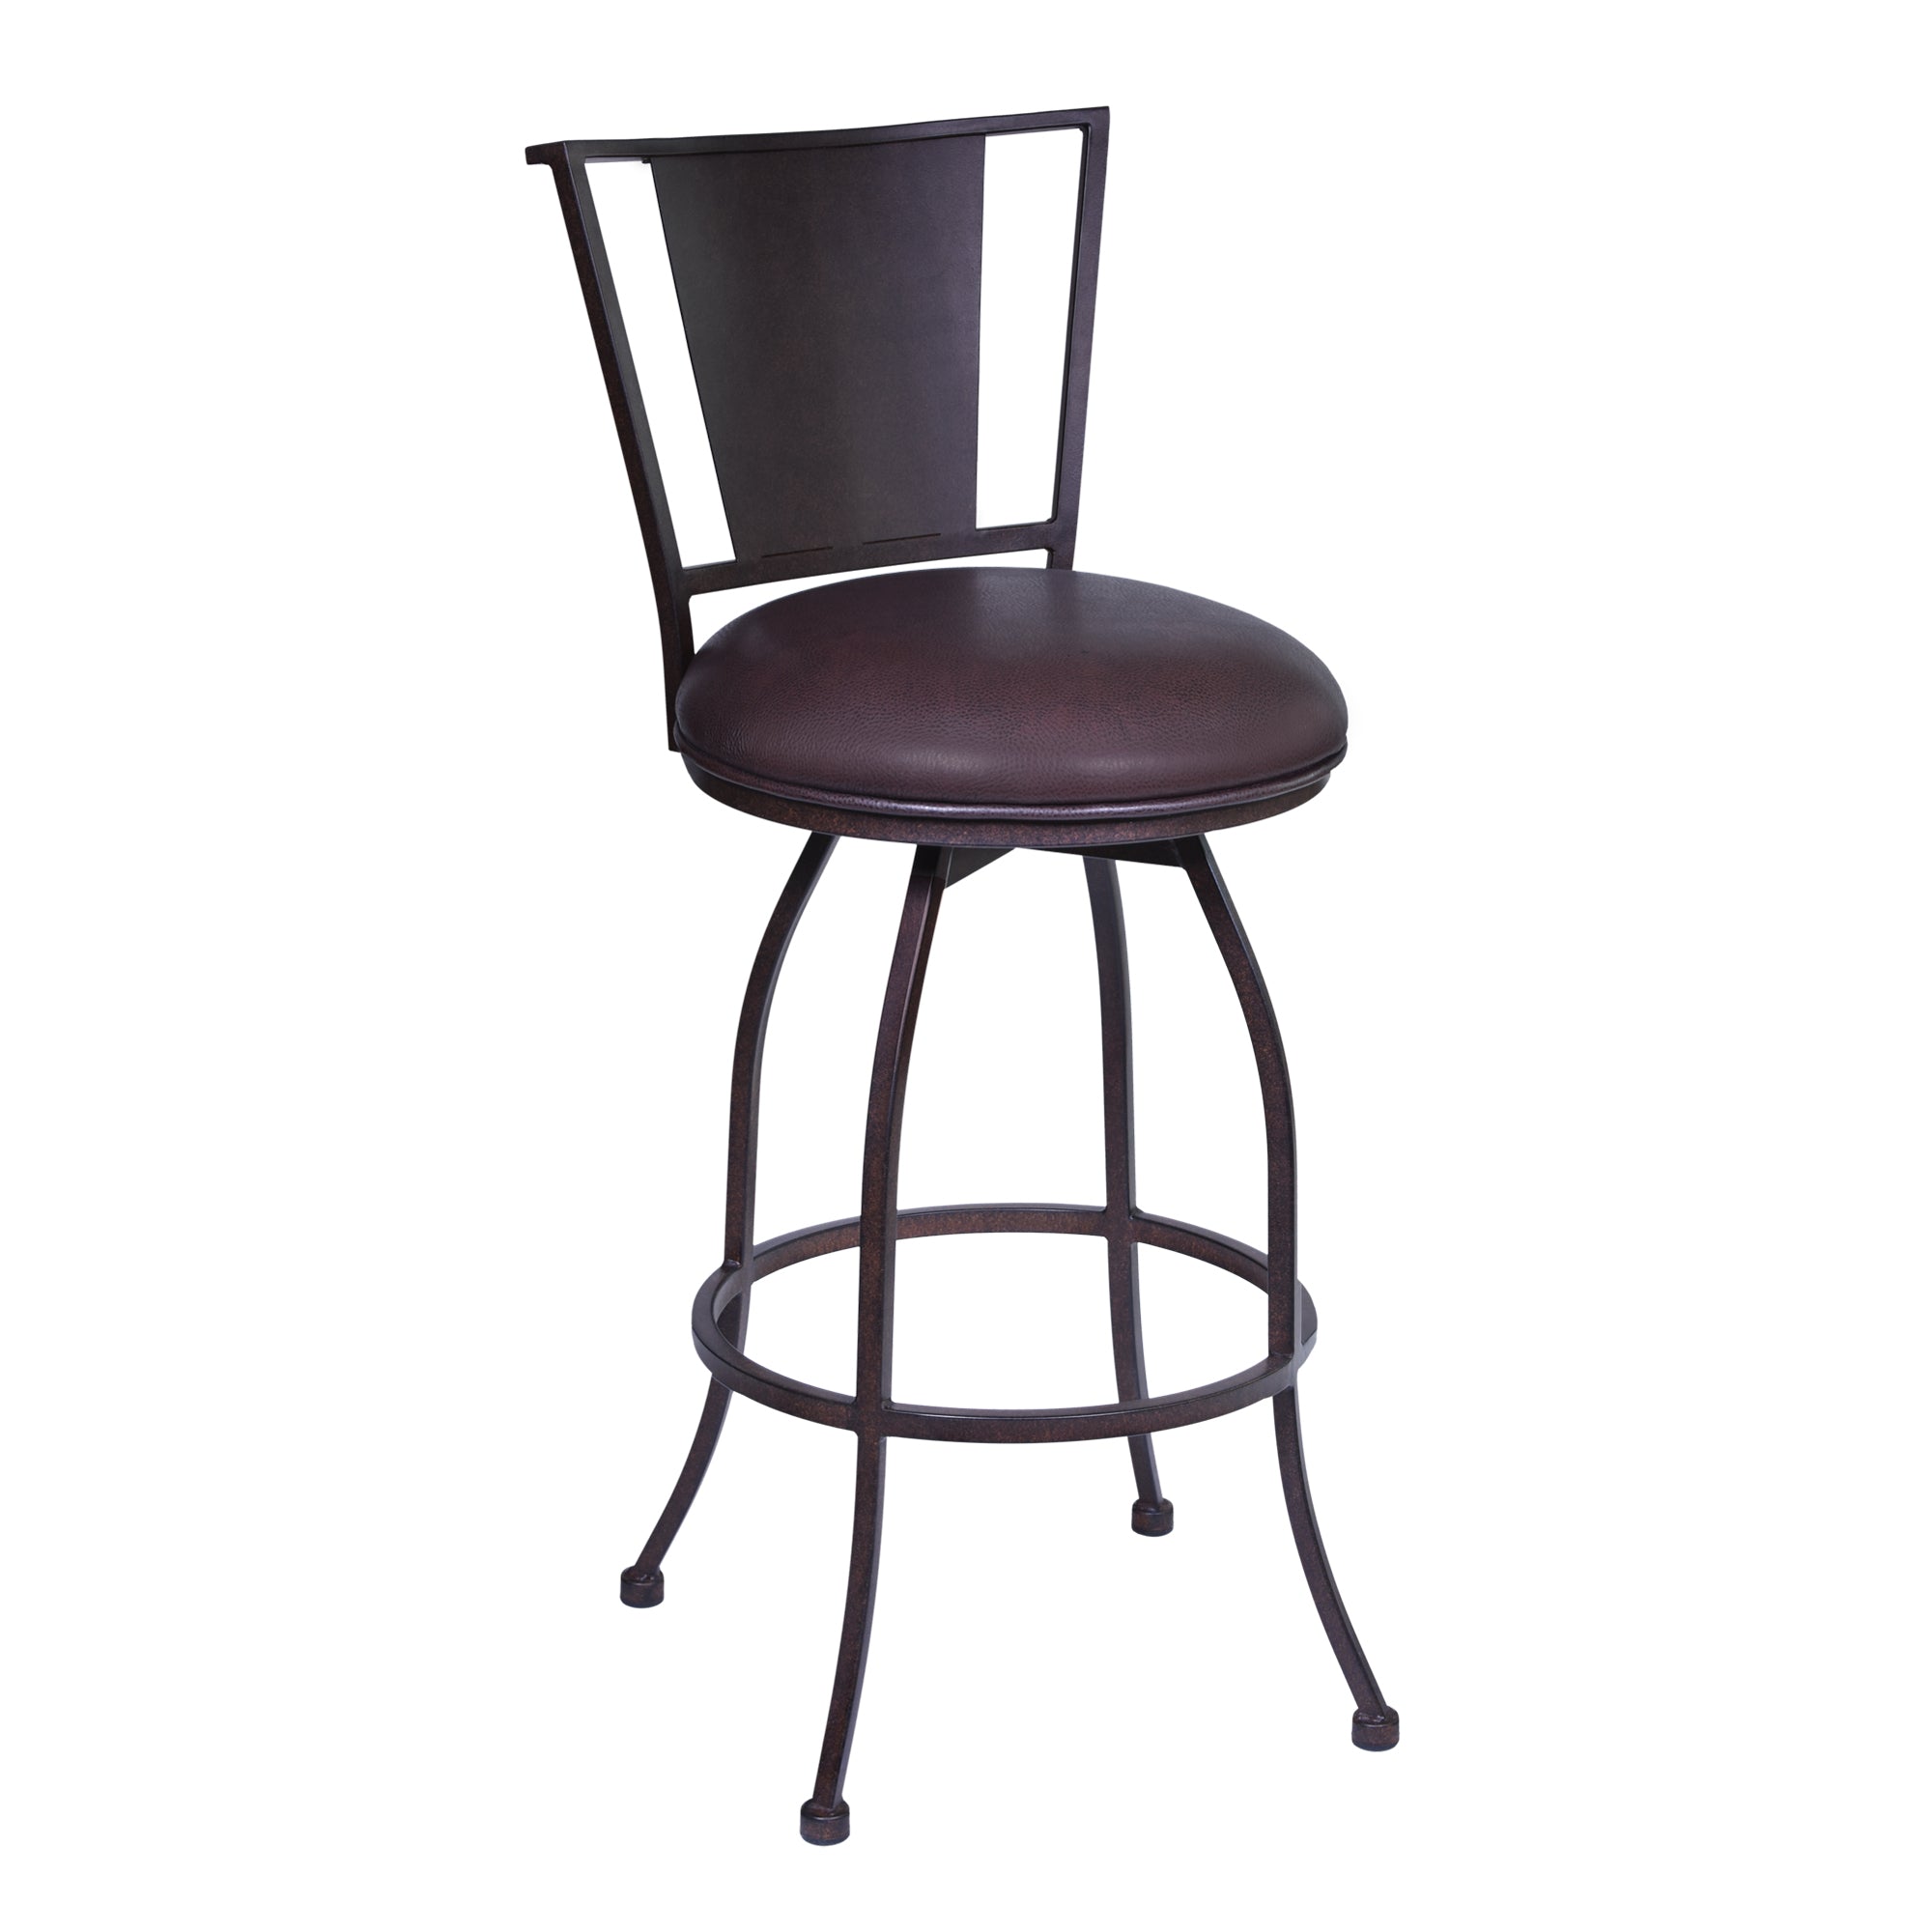 Armen Living LCDY26BABR Dynasty 26 Counter Height Barstool in Auburn Bay Finish with Brown Faux Leather